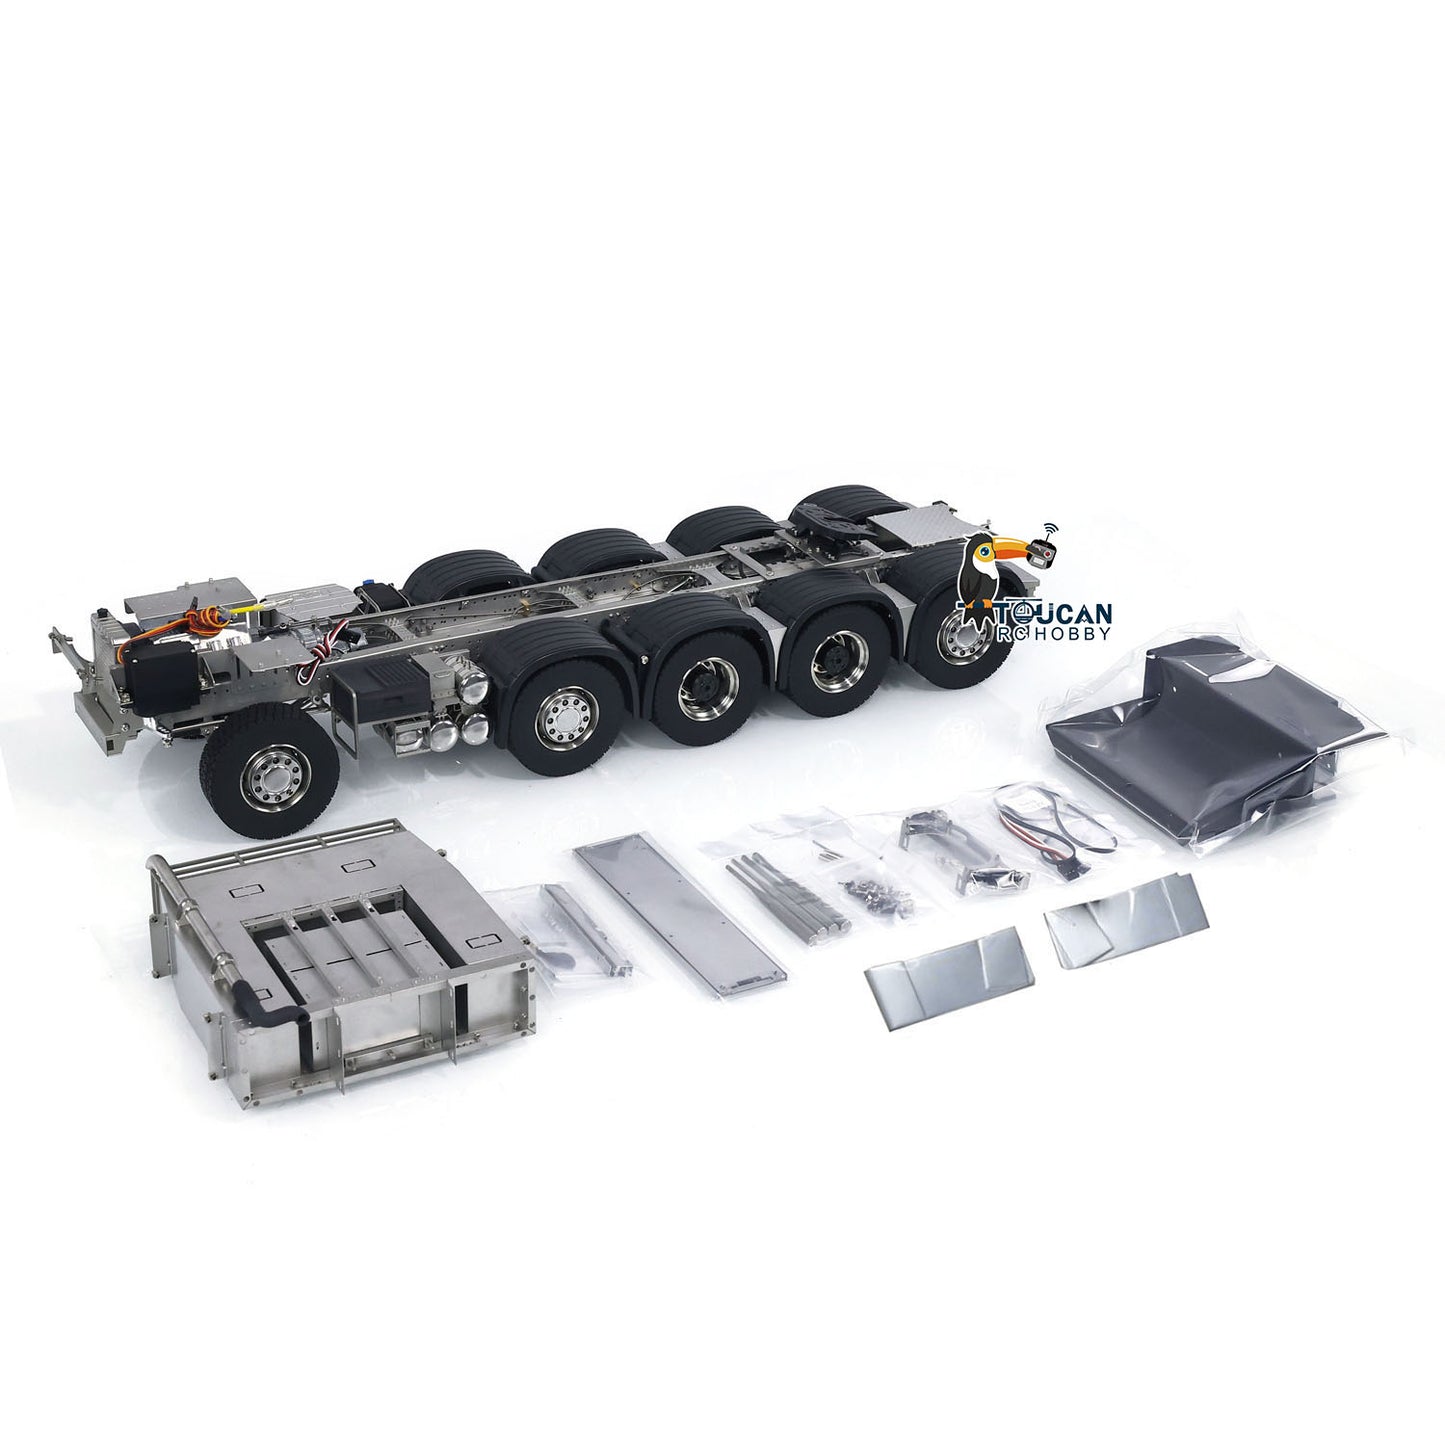 ScaleClub 1/14 10x10 Metal Chassis for RC Tractor Truck FH750 Remote Control Car Simulation Vehicle Hobby Model DIY Parts